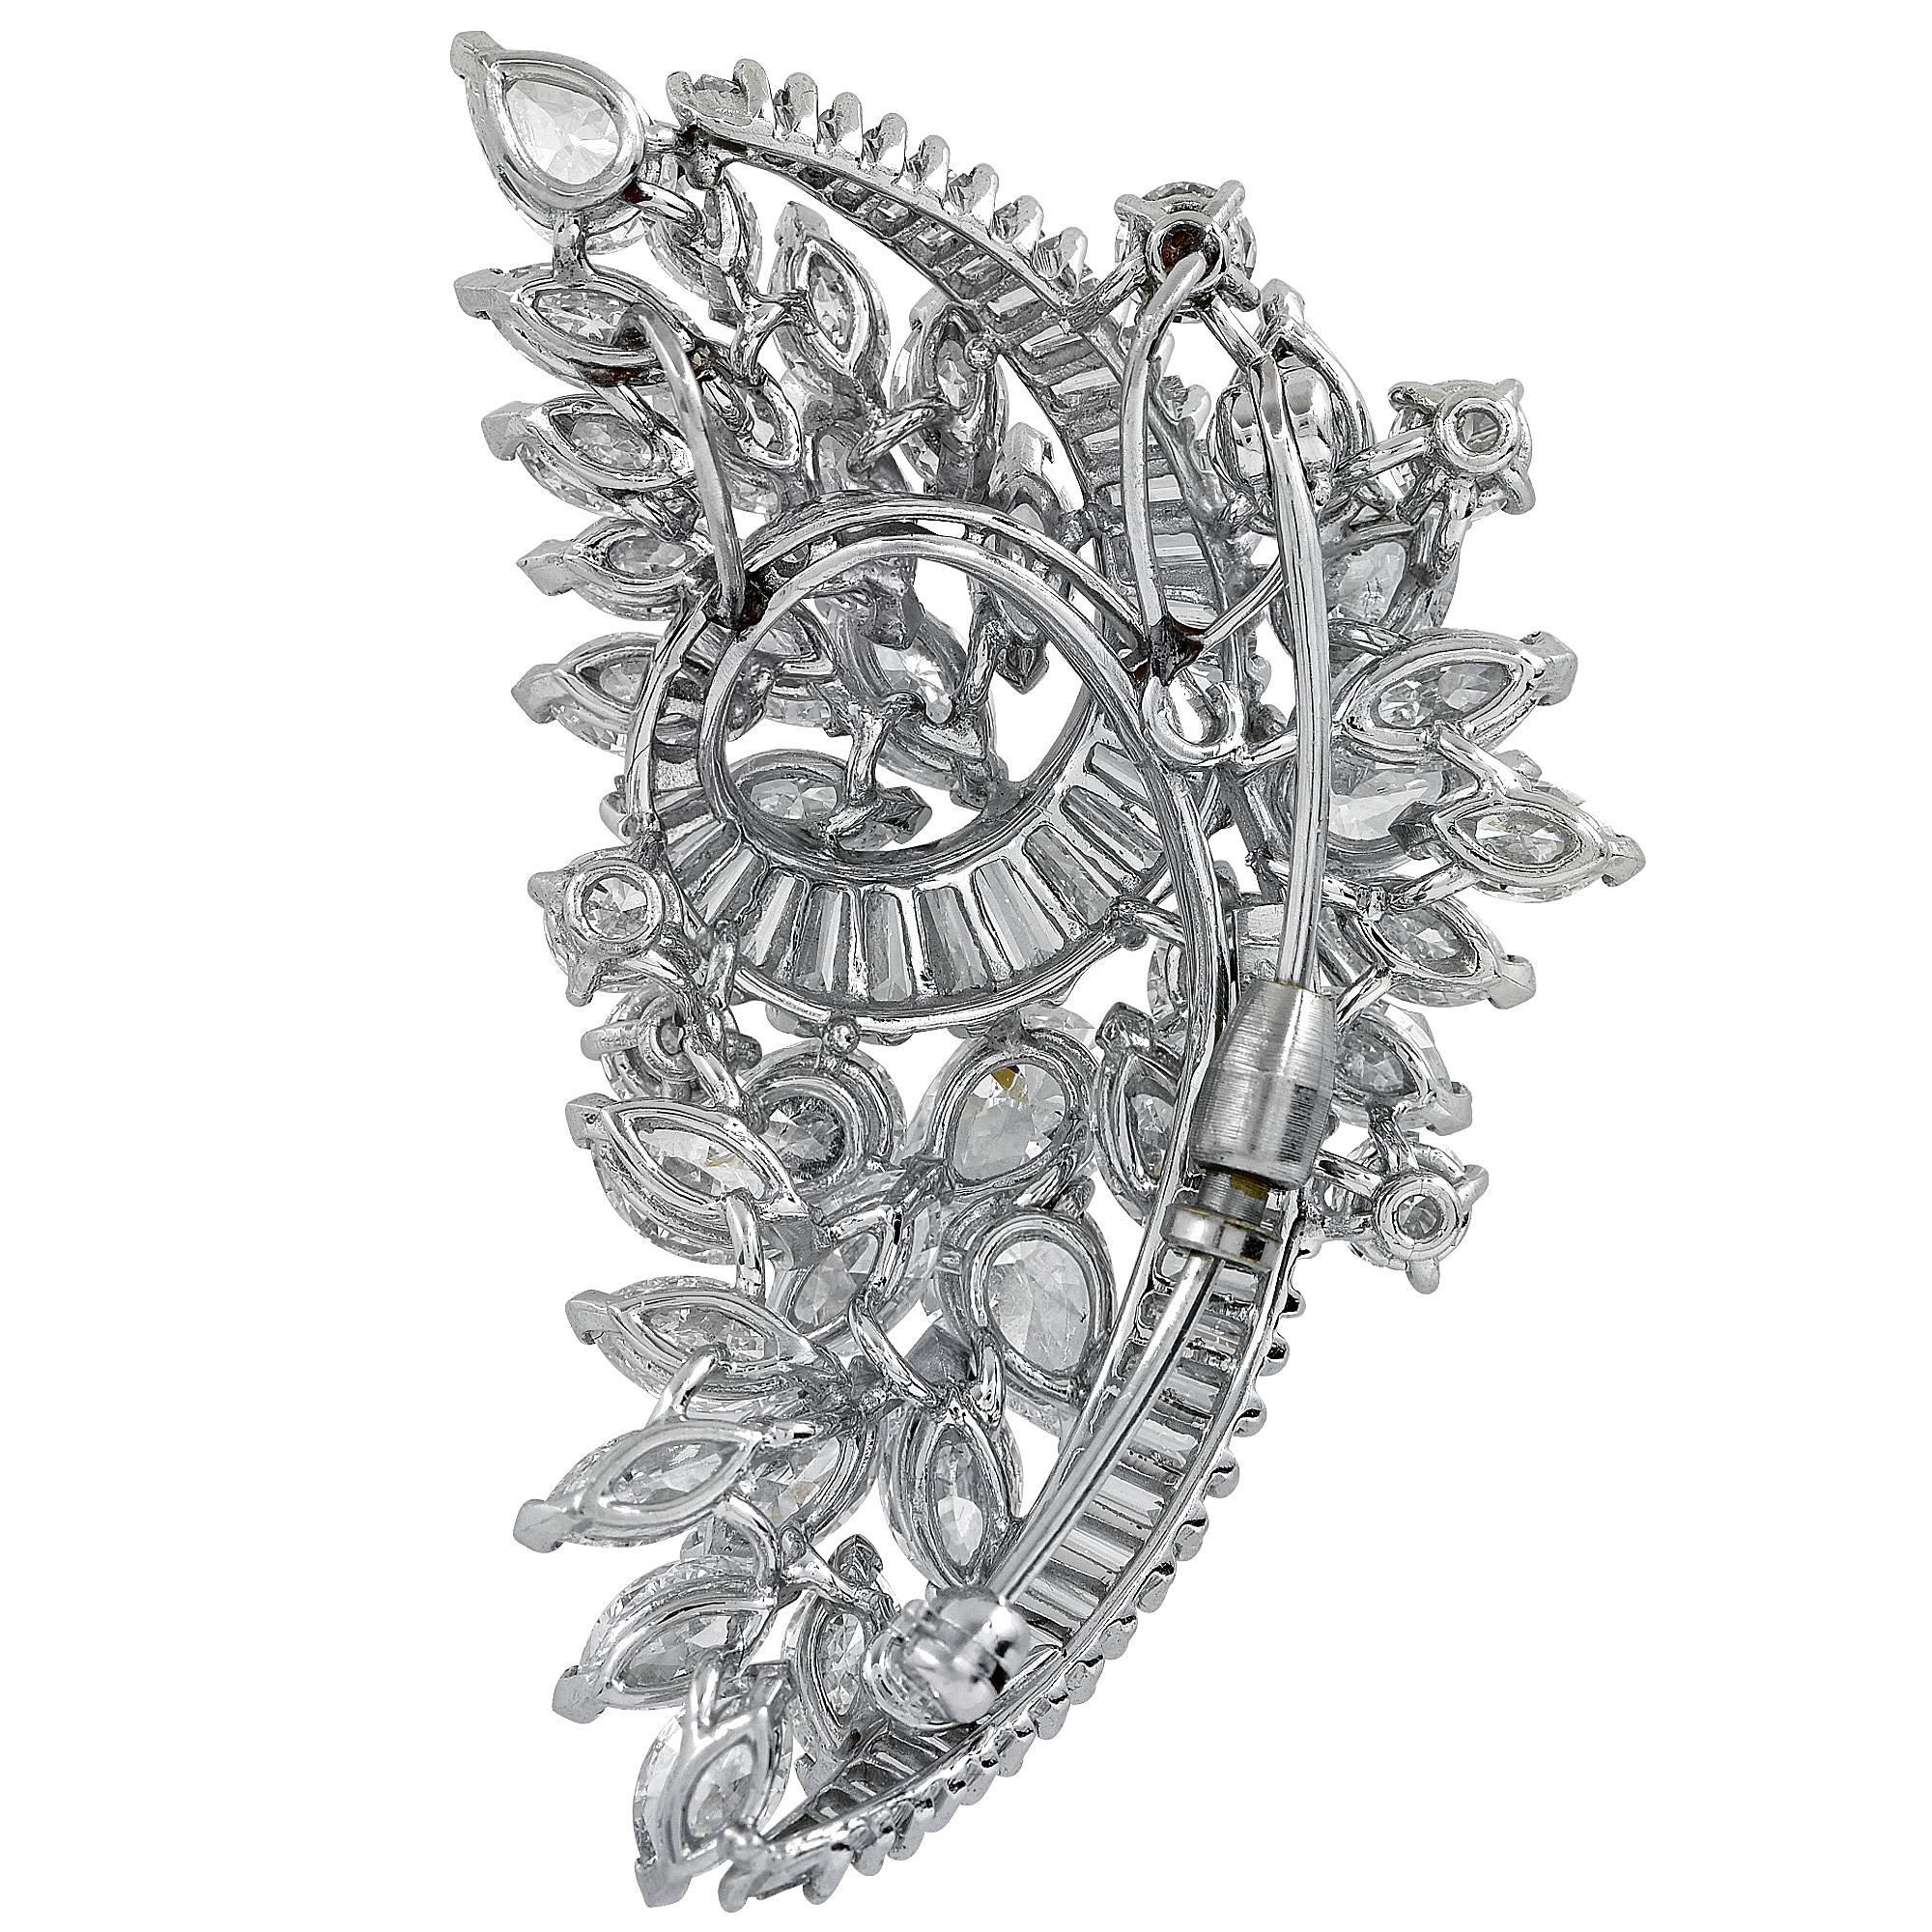 Platinum brooch featuring baguette, pear and marquise cut diamonds weighing approximately 15cts total F-G color VS clarity.

It is stamped and/or tested as platinum.
The metal weight is 21.30 grams.

This diamond brooch is accompanied by a retail